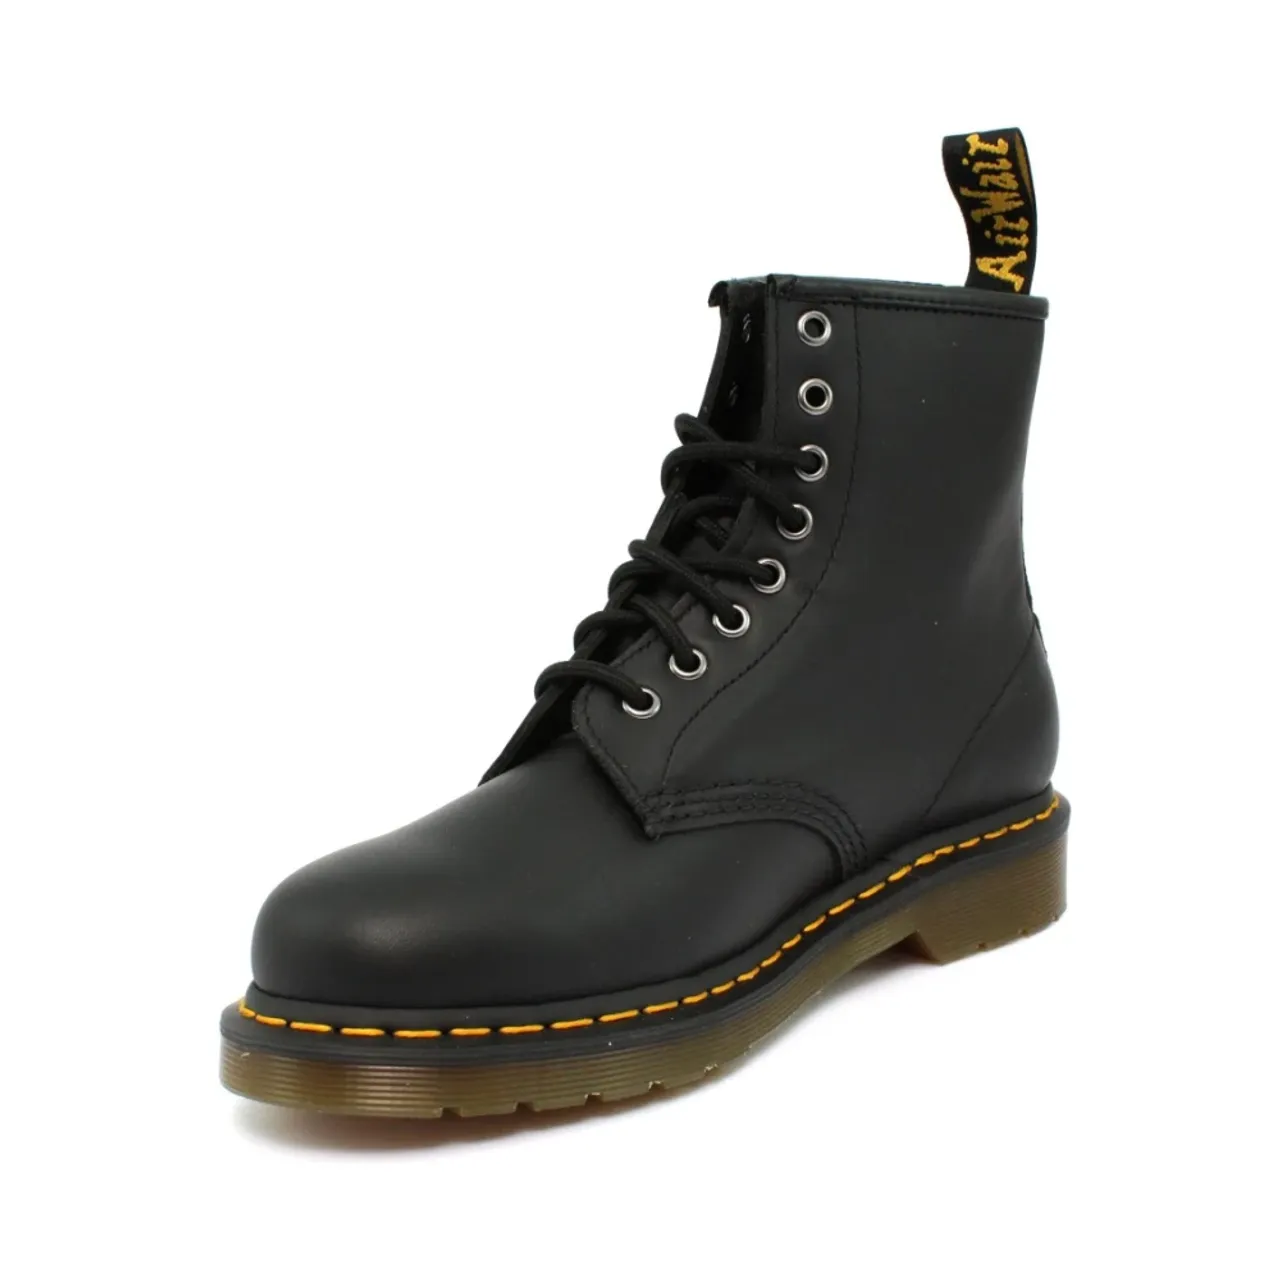 Dr. Martens , 1460 Nappa Leather Lace Up Boots ,Black male, Sizes: